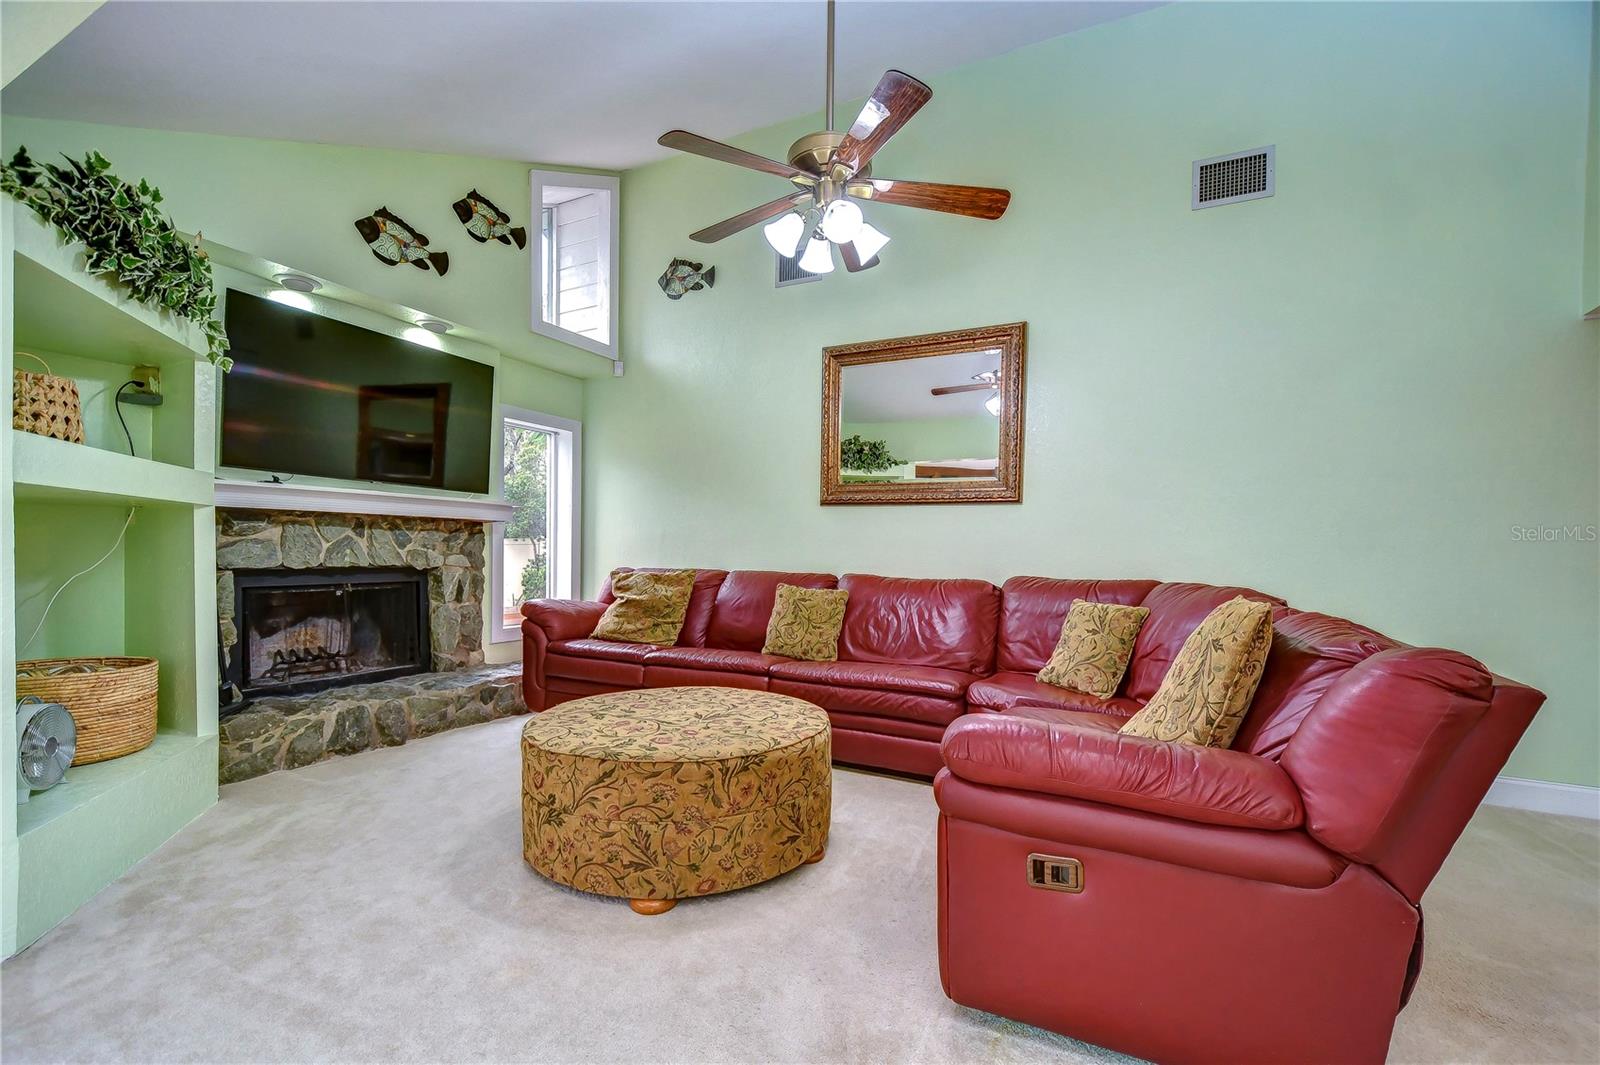 Perfect game room or extended family room!